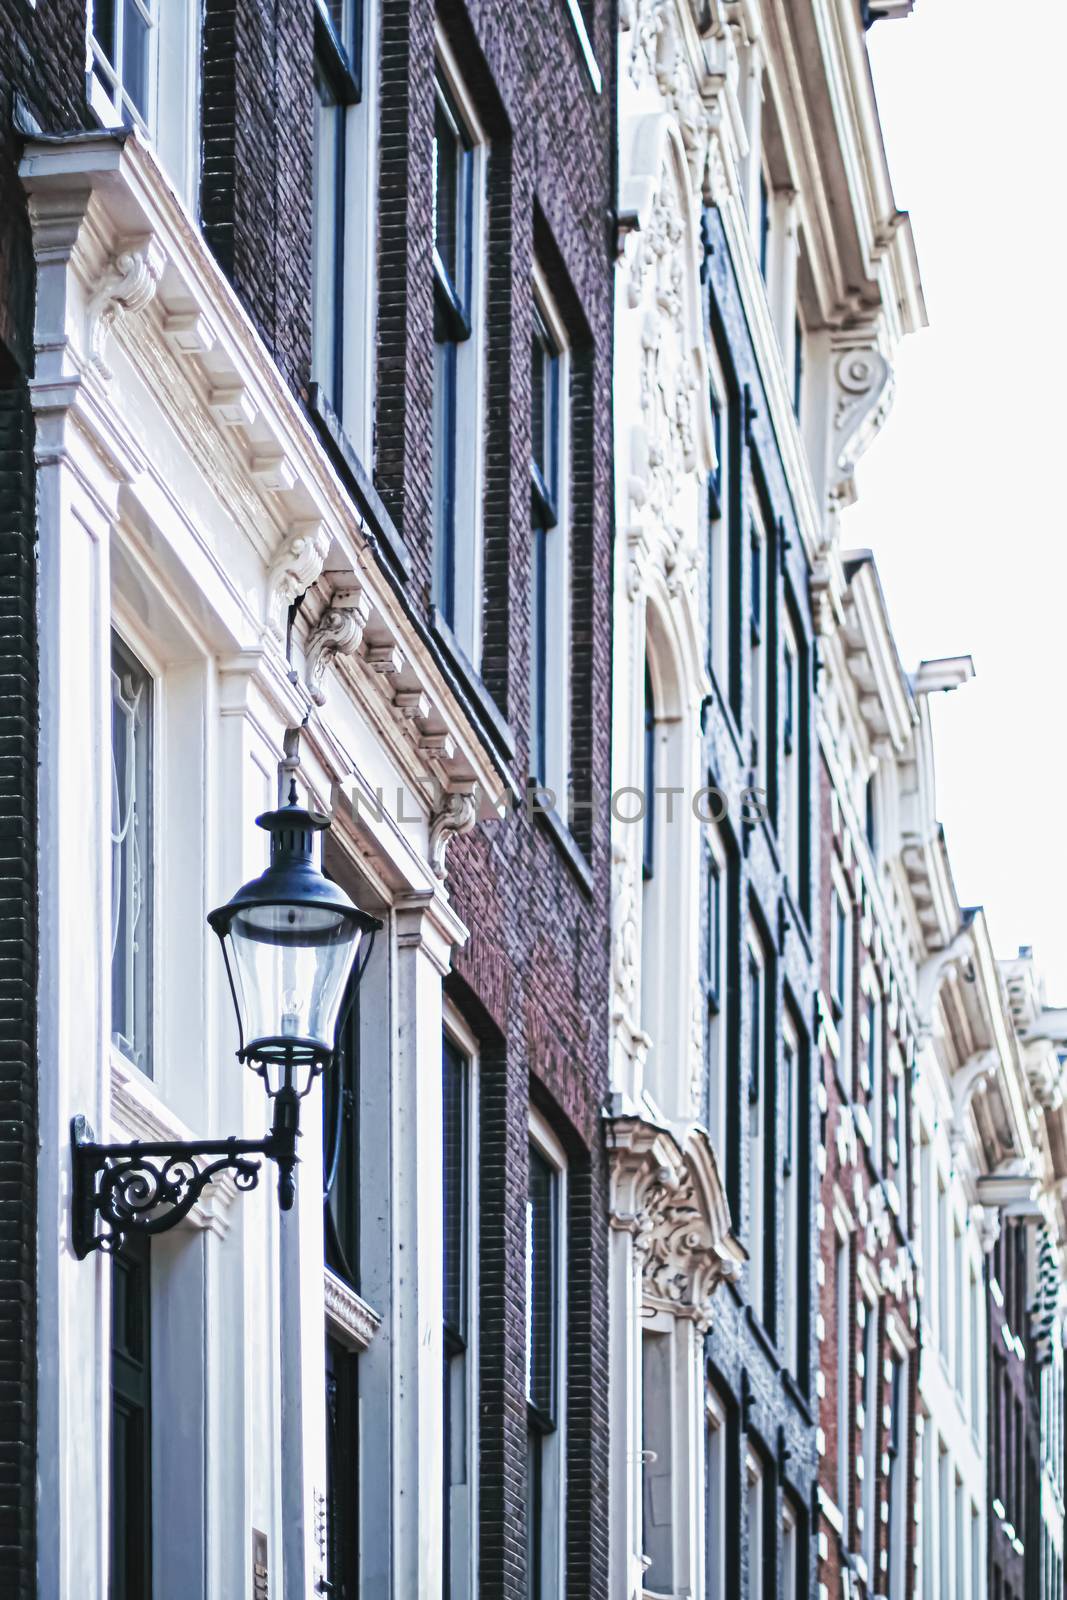 Architectural detail of a building on the main city center street of Amsterdam in Netherlands by Anneleven